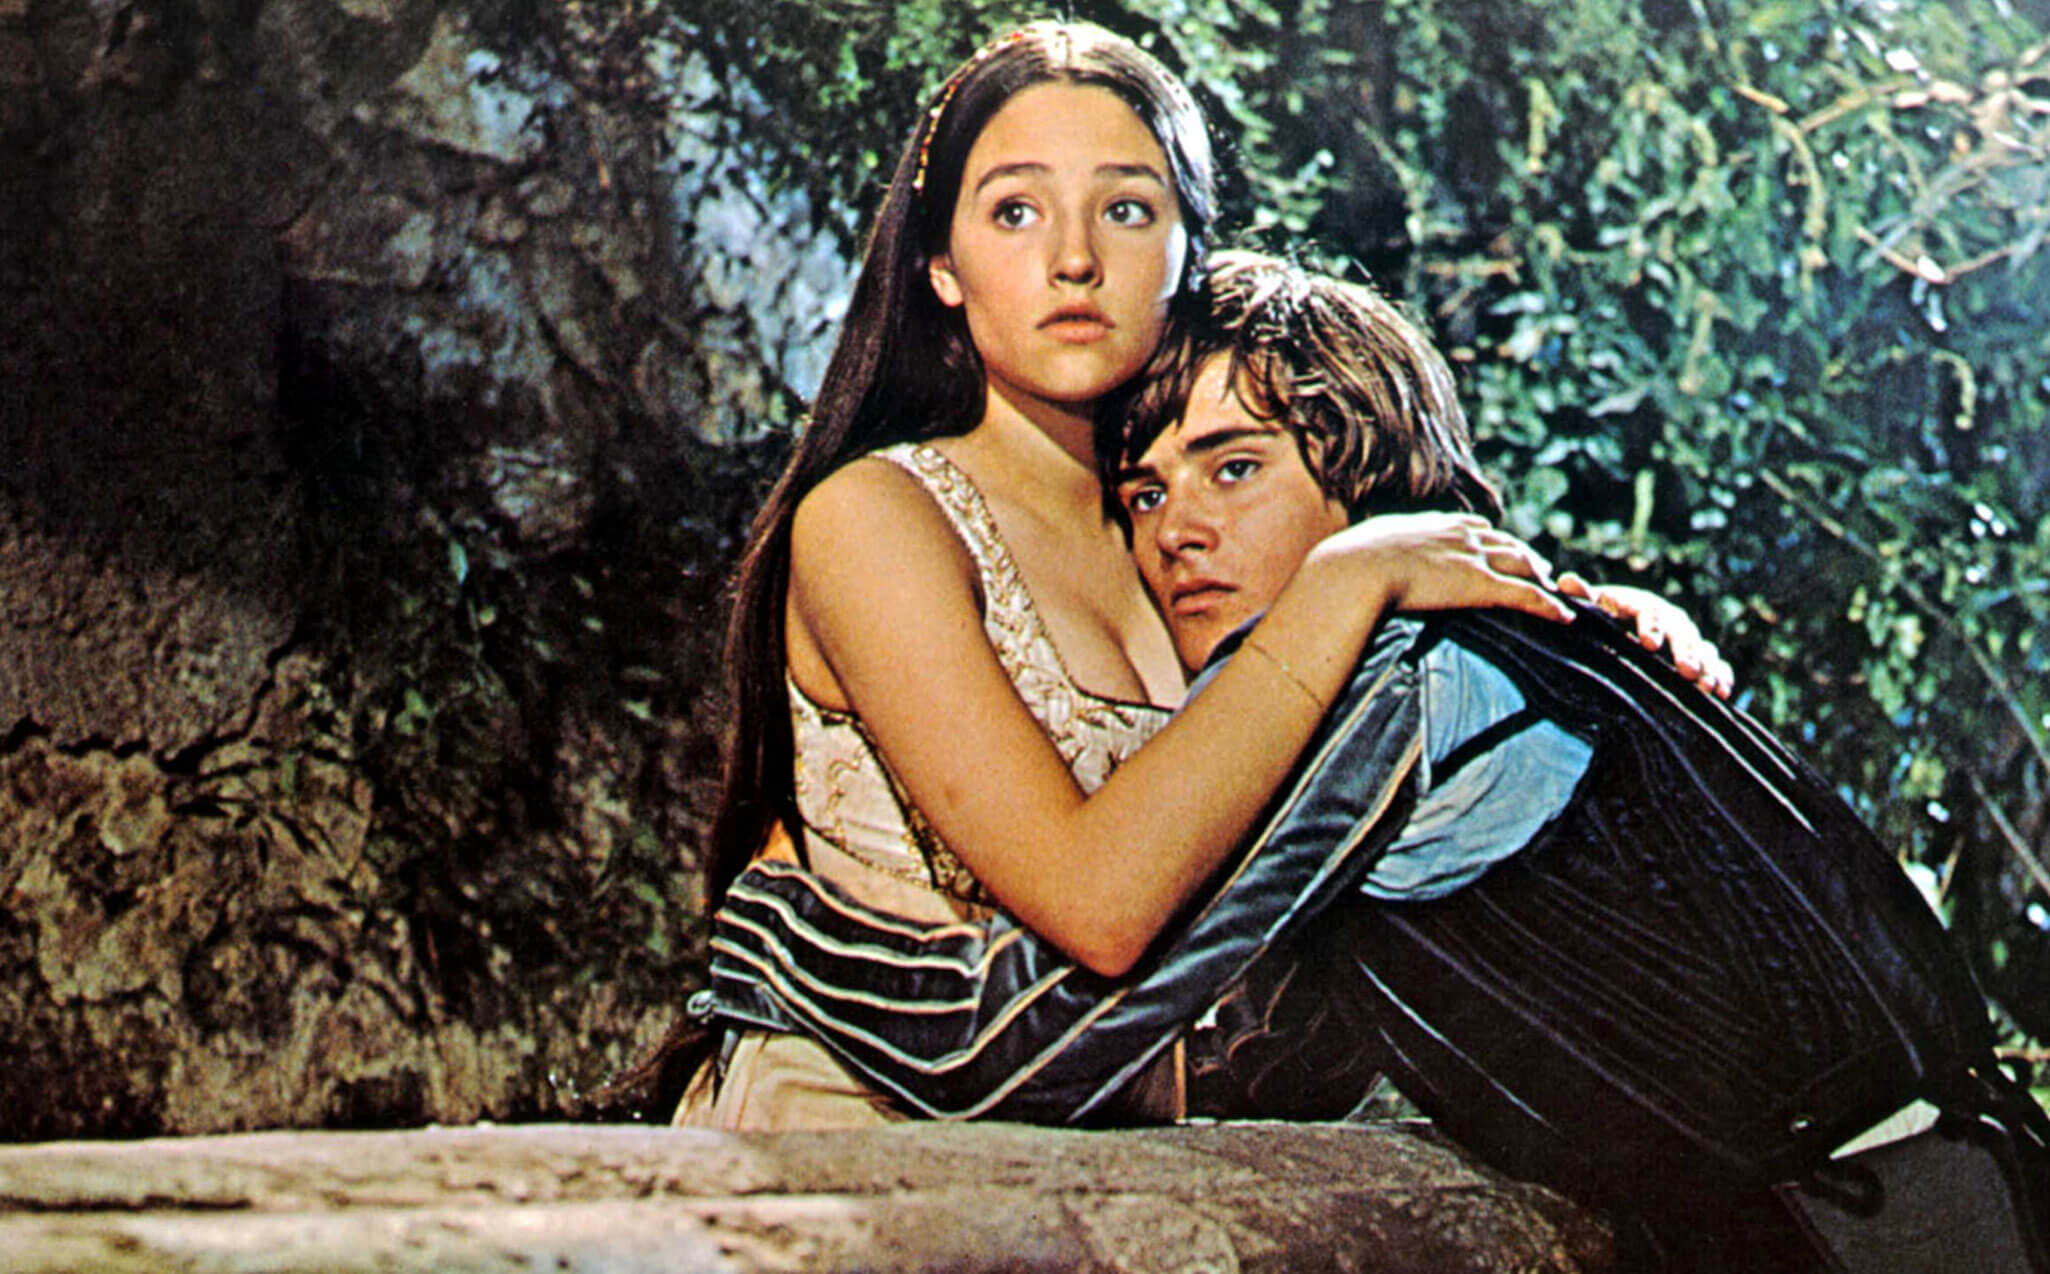 Olivia Hussey and Leonard Whiting in Franco Zeffirelli’s ROMEO AND JULIET (1968). Courtesy Film Forum. Playing January 17 & 18.